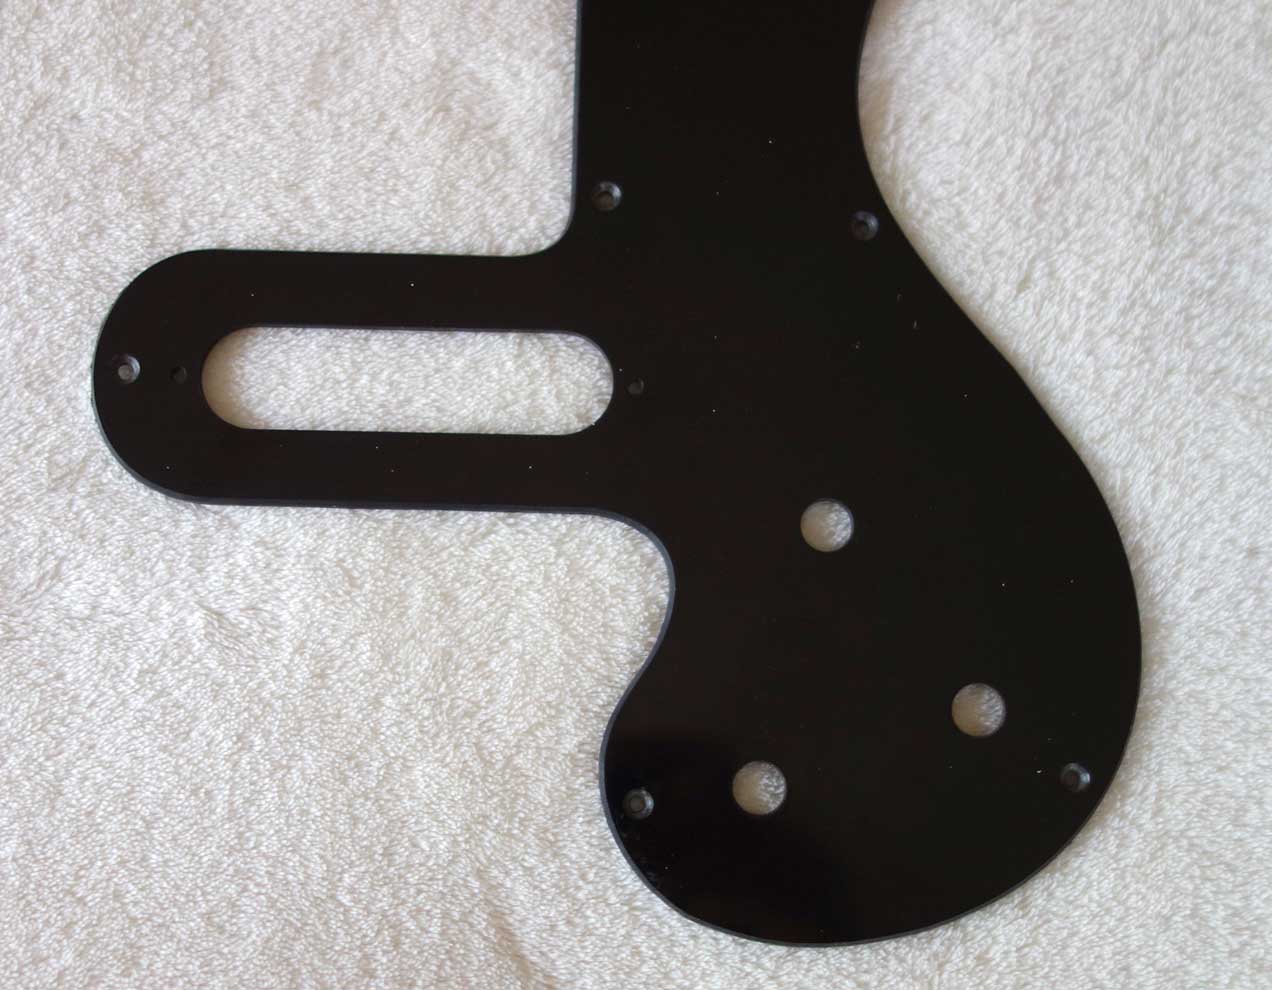 Aftermarket Gibson Melody Maker 1 PU Pickguard w/White Lettering for Vintage 1960-1963 MMs